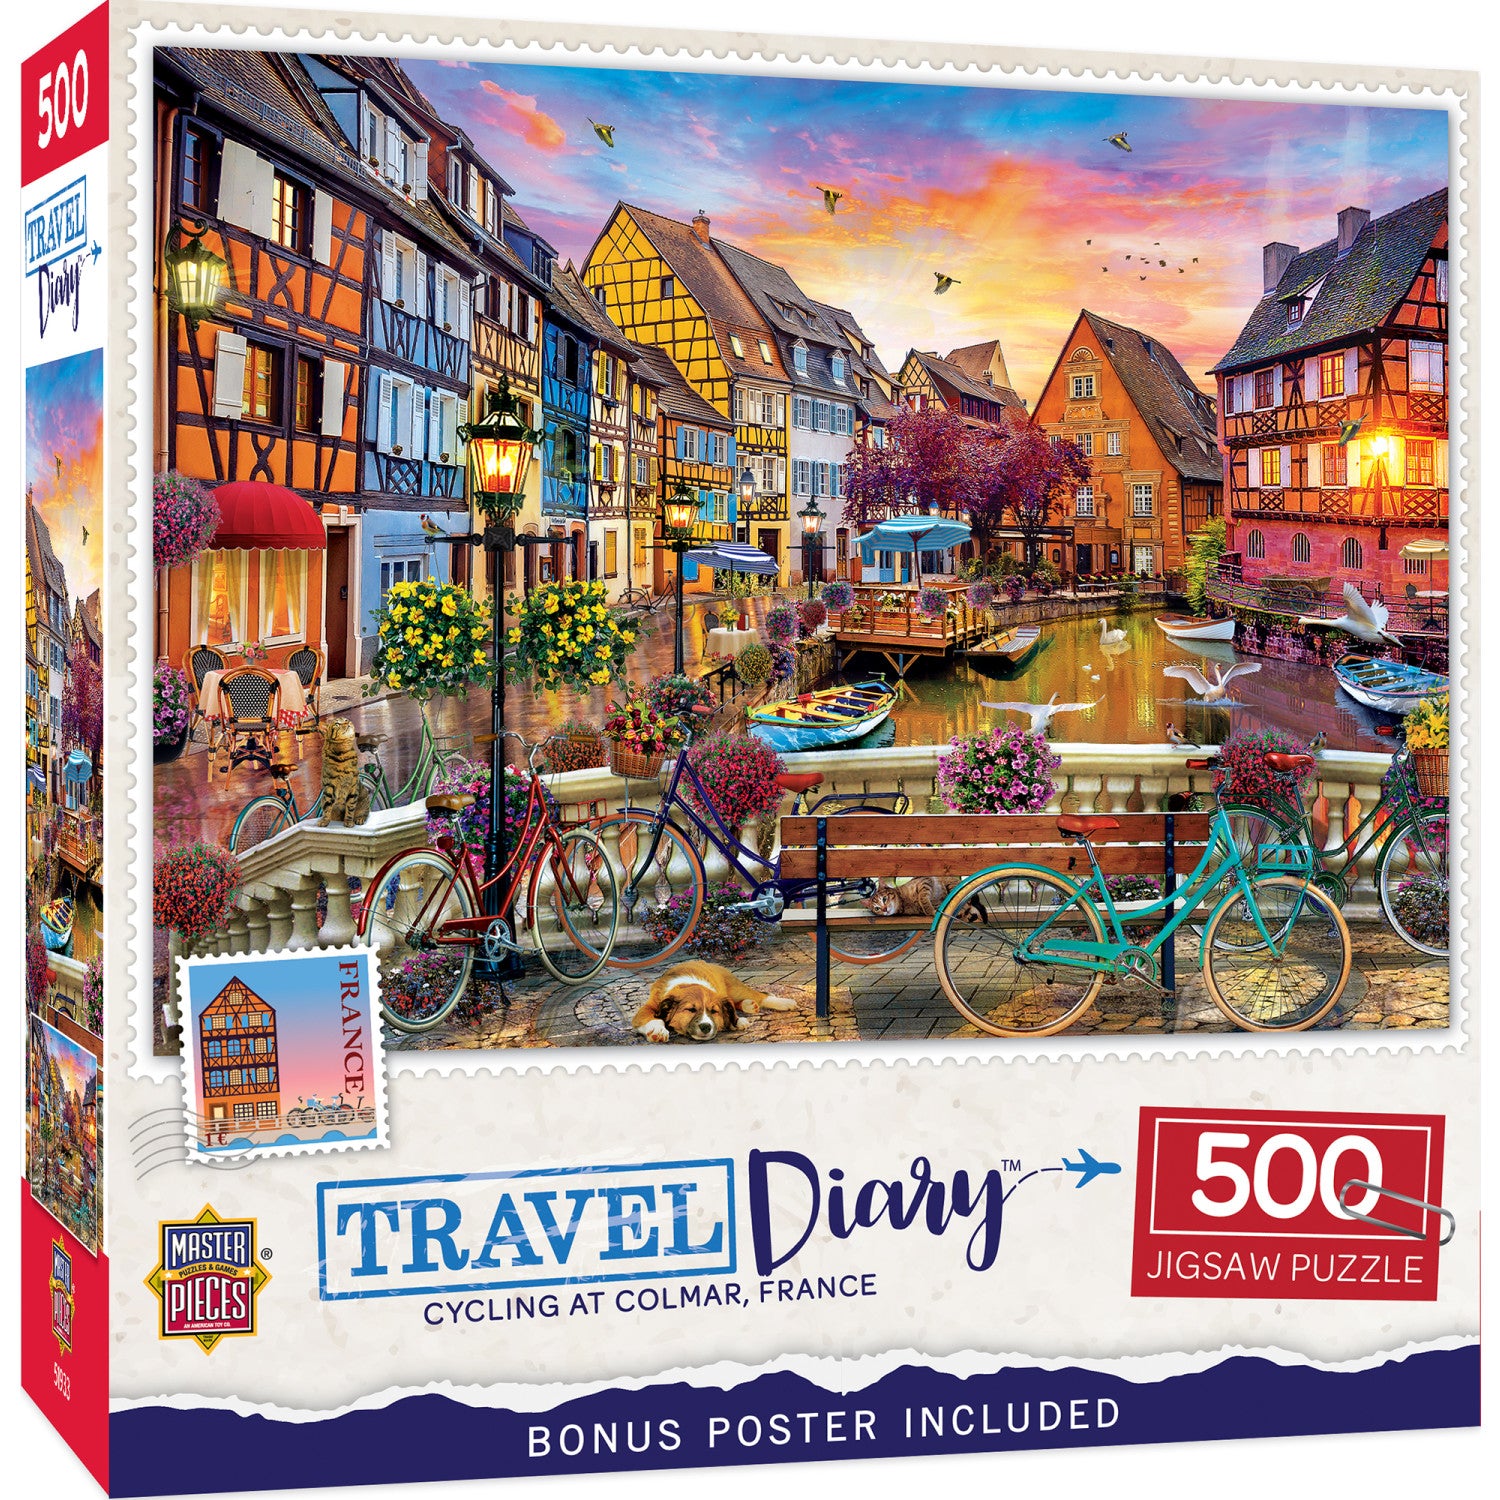 Travel Diary - Cycling at Colmar 500 Piece Jigsaw Puzzle